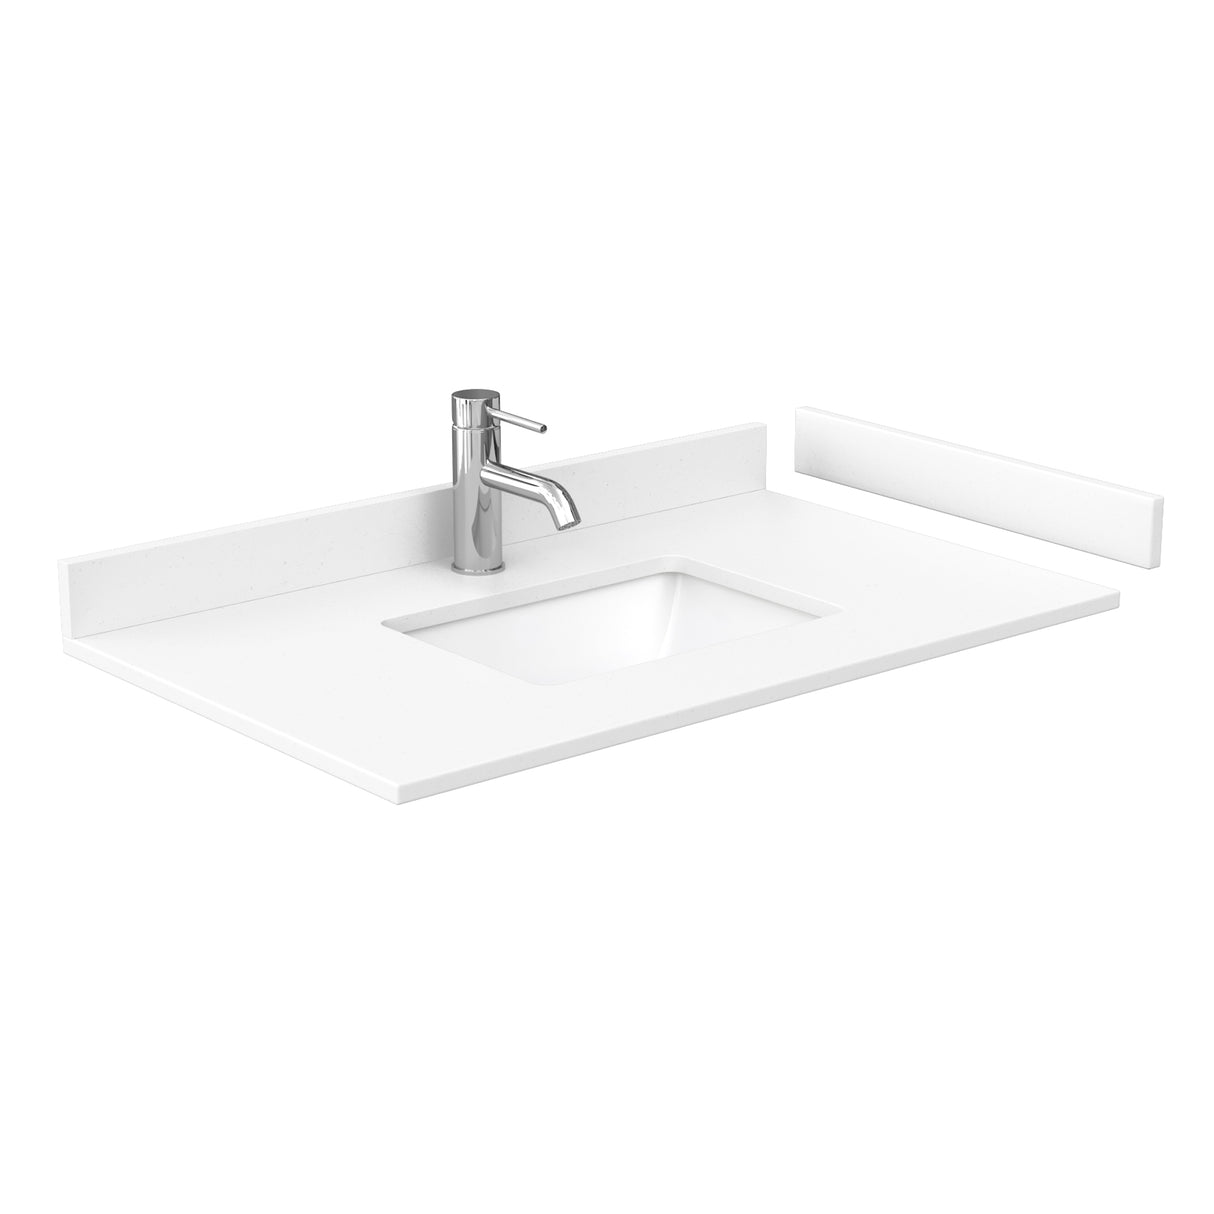 Sheffield 36 inch Single Bathroom Vanity in Light Green White Cultured Marble Countertop Undermount Square Sink Brushed Nickel Trim